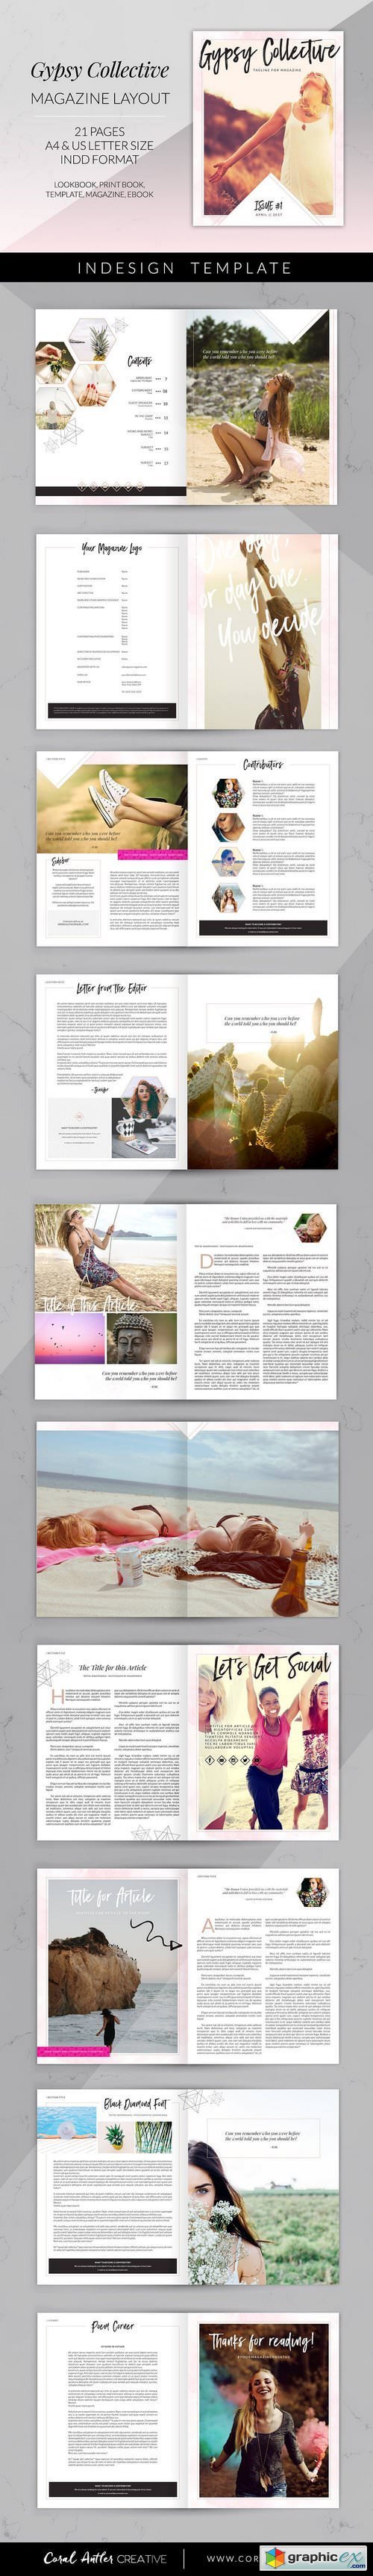 Gypsy Collective Magazine Layout